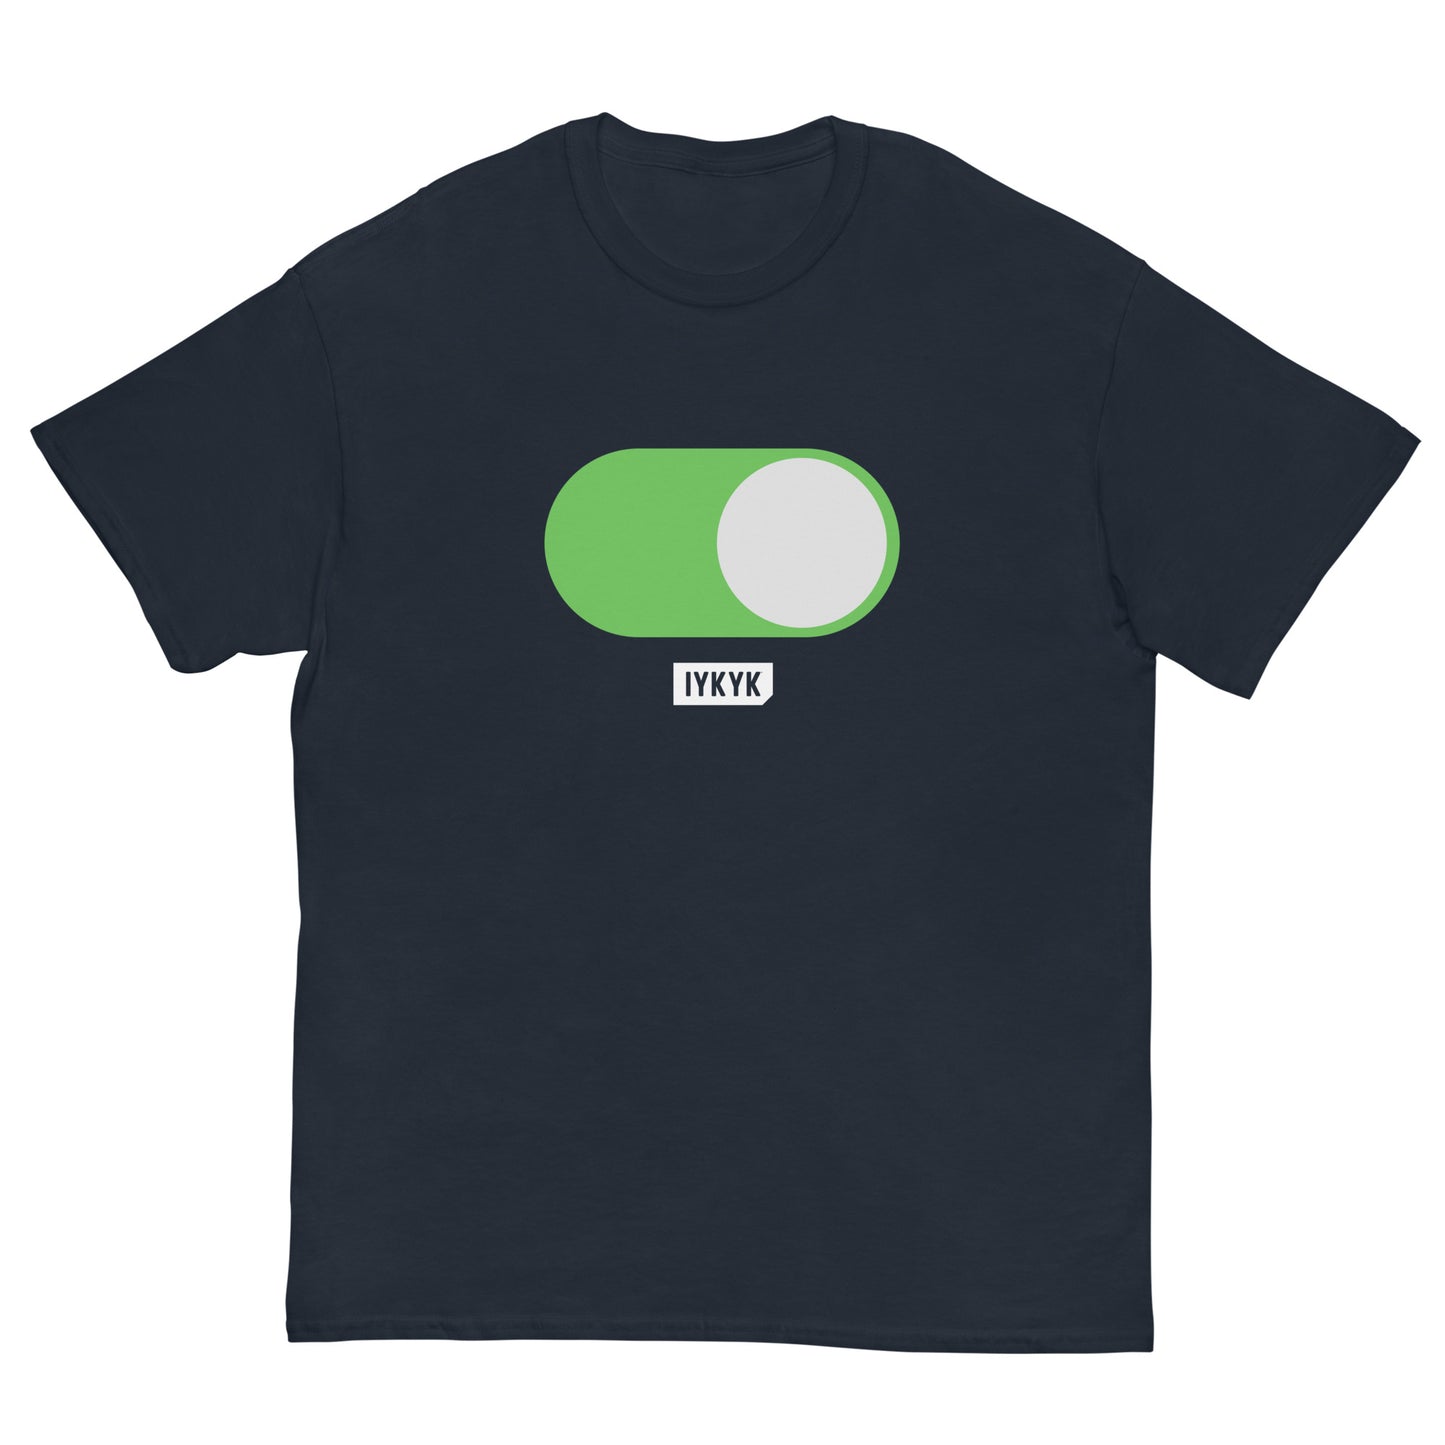 Classic Everyday Toggle On Just For Fun Tee